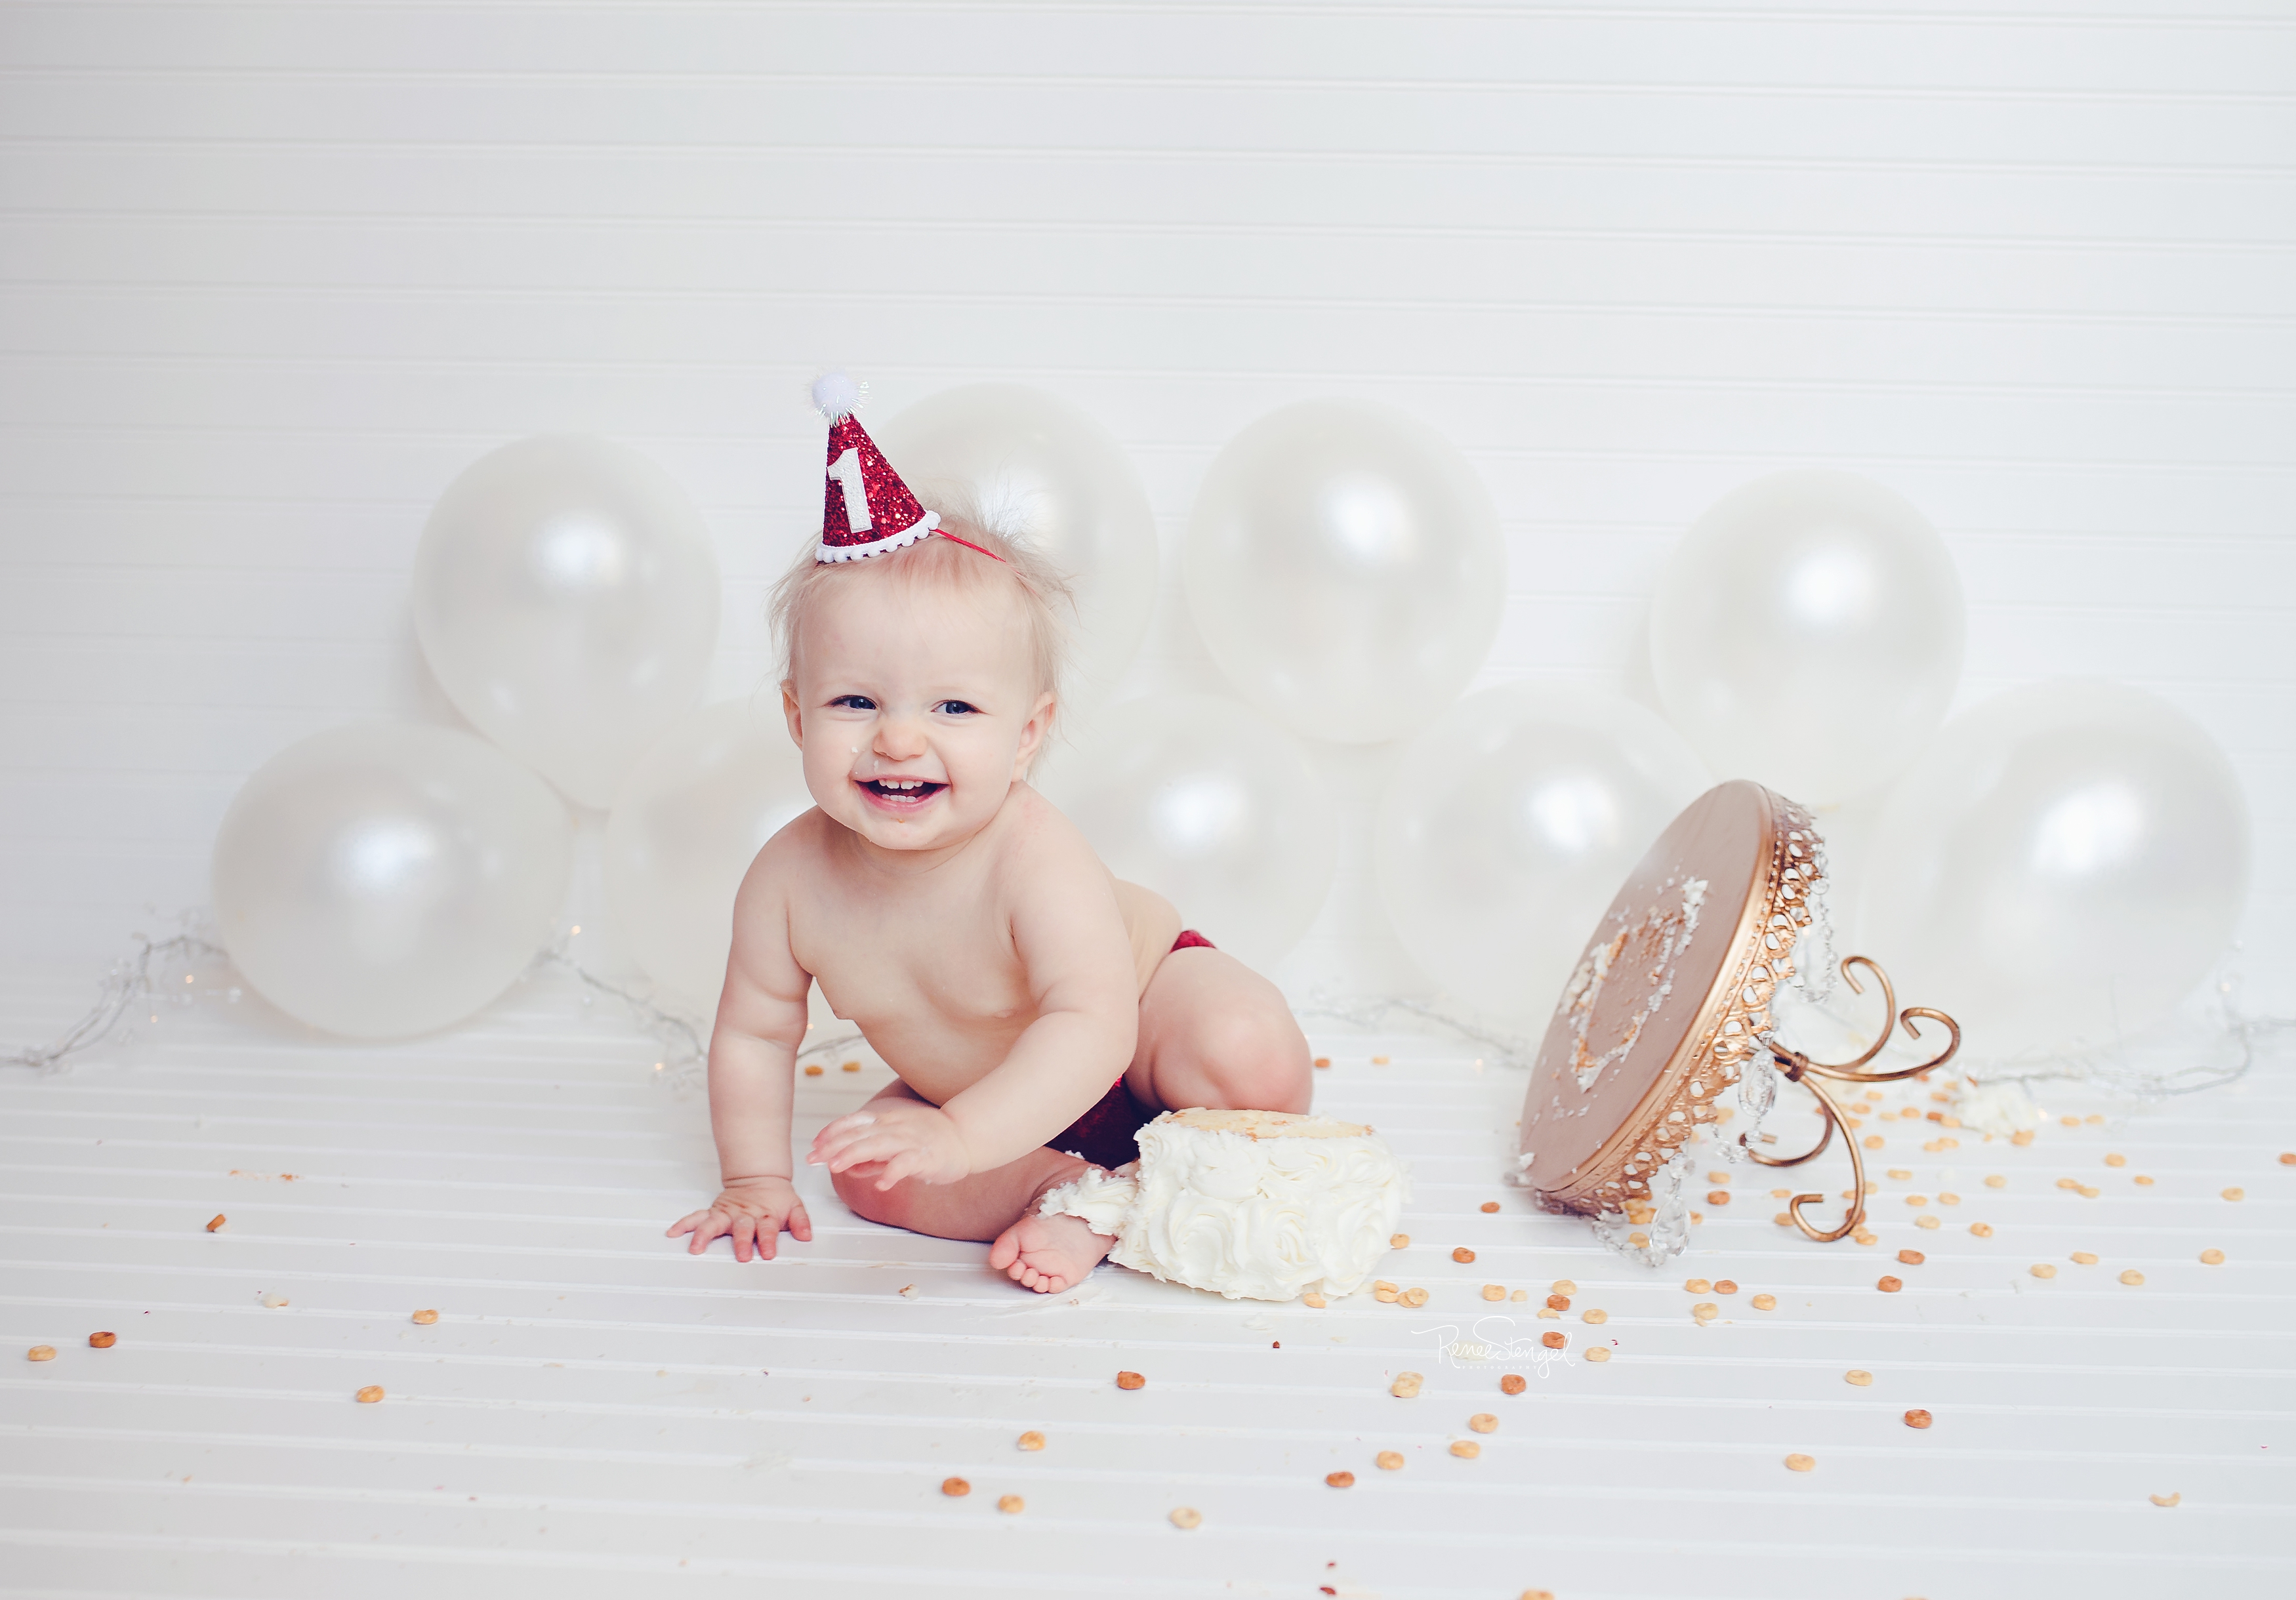 RENEE STENGEL Photography | Charlotte Underwater and Portrait Photographer | Winter 1st Birthday Cake Smash | White Gold and Red Sparkle